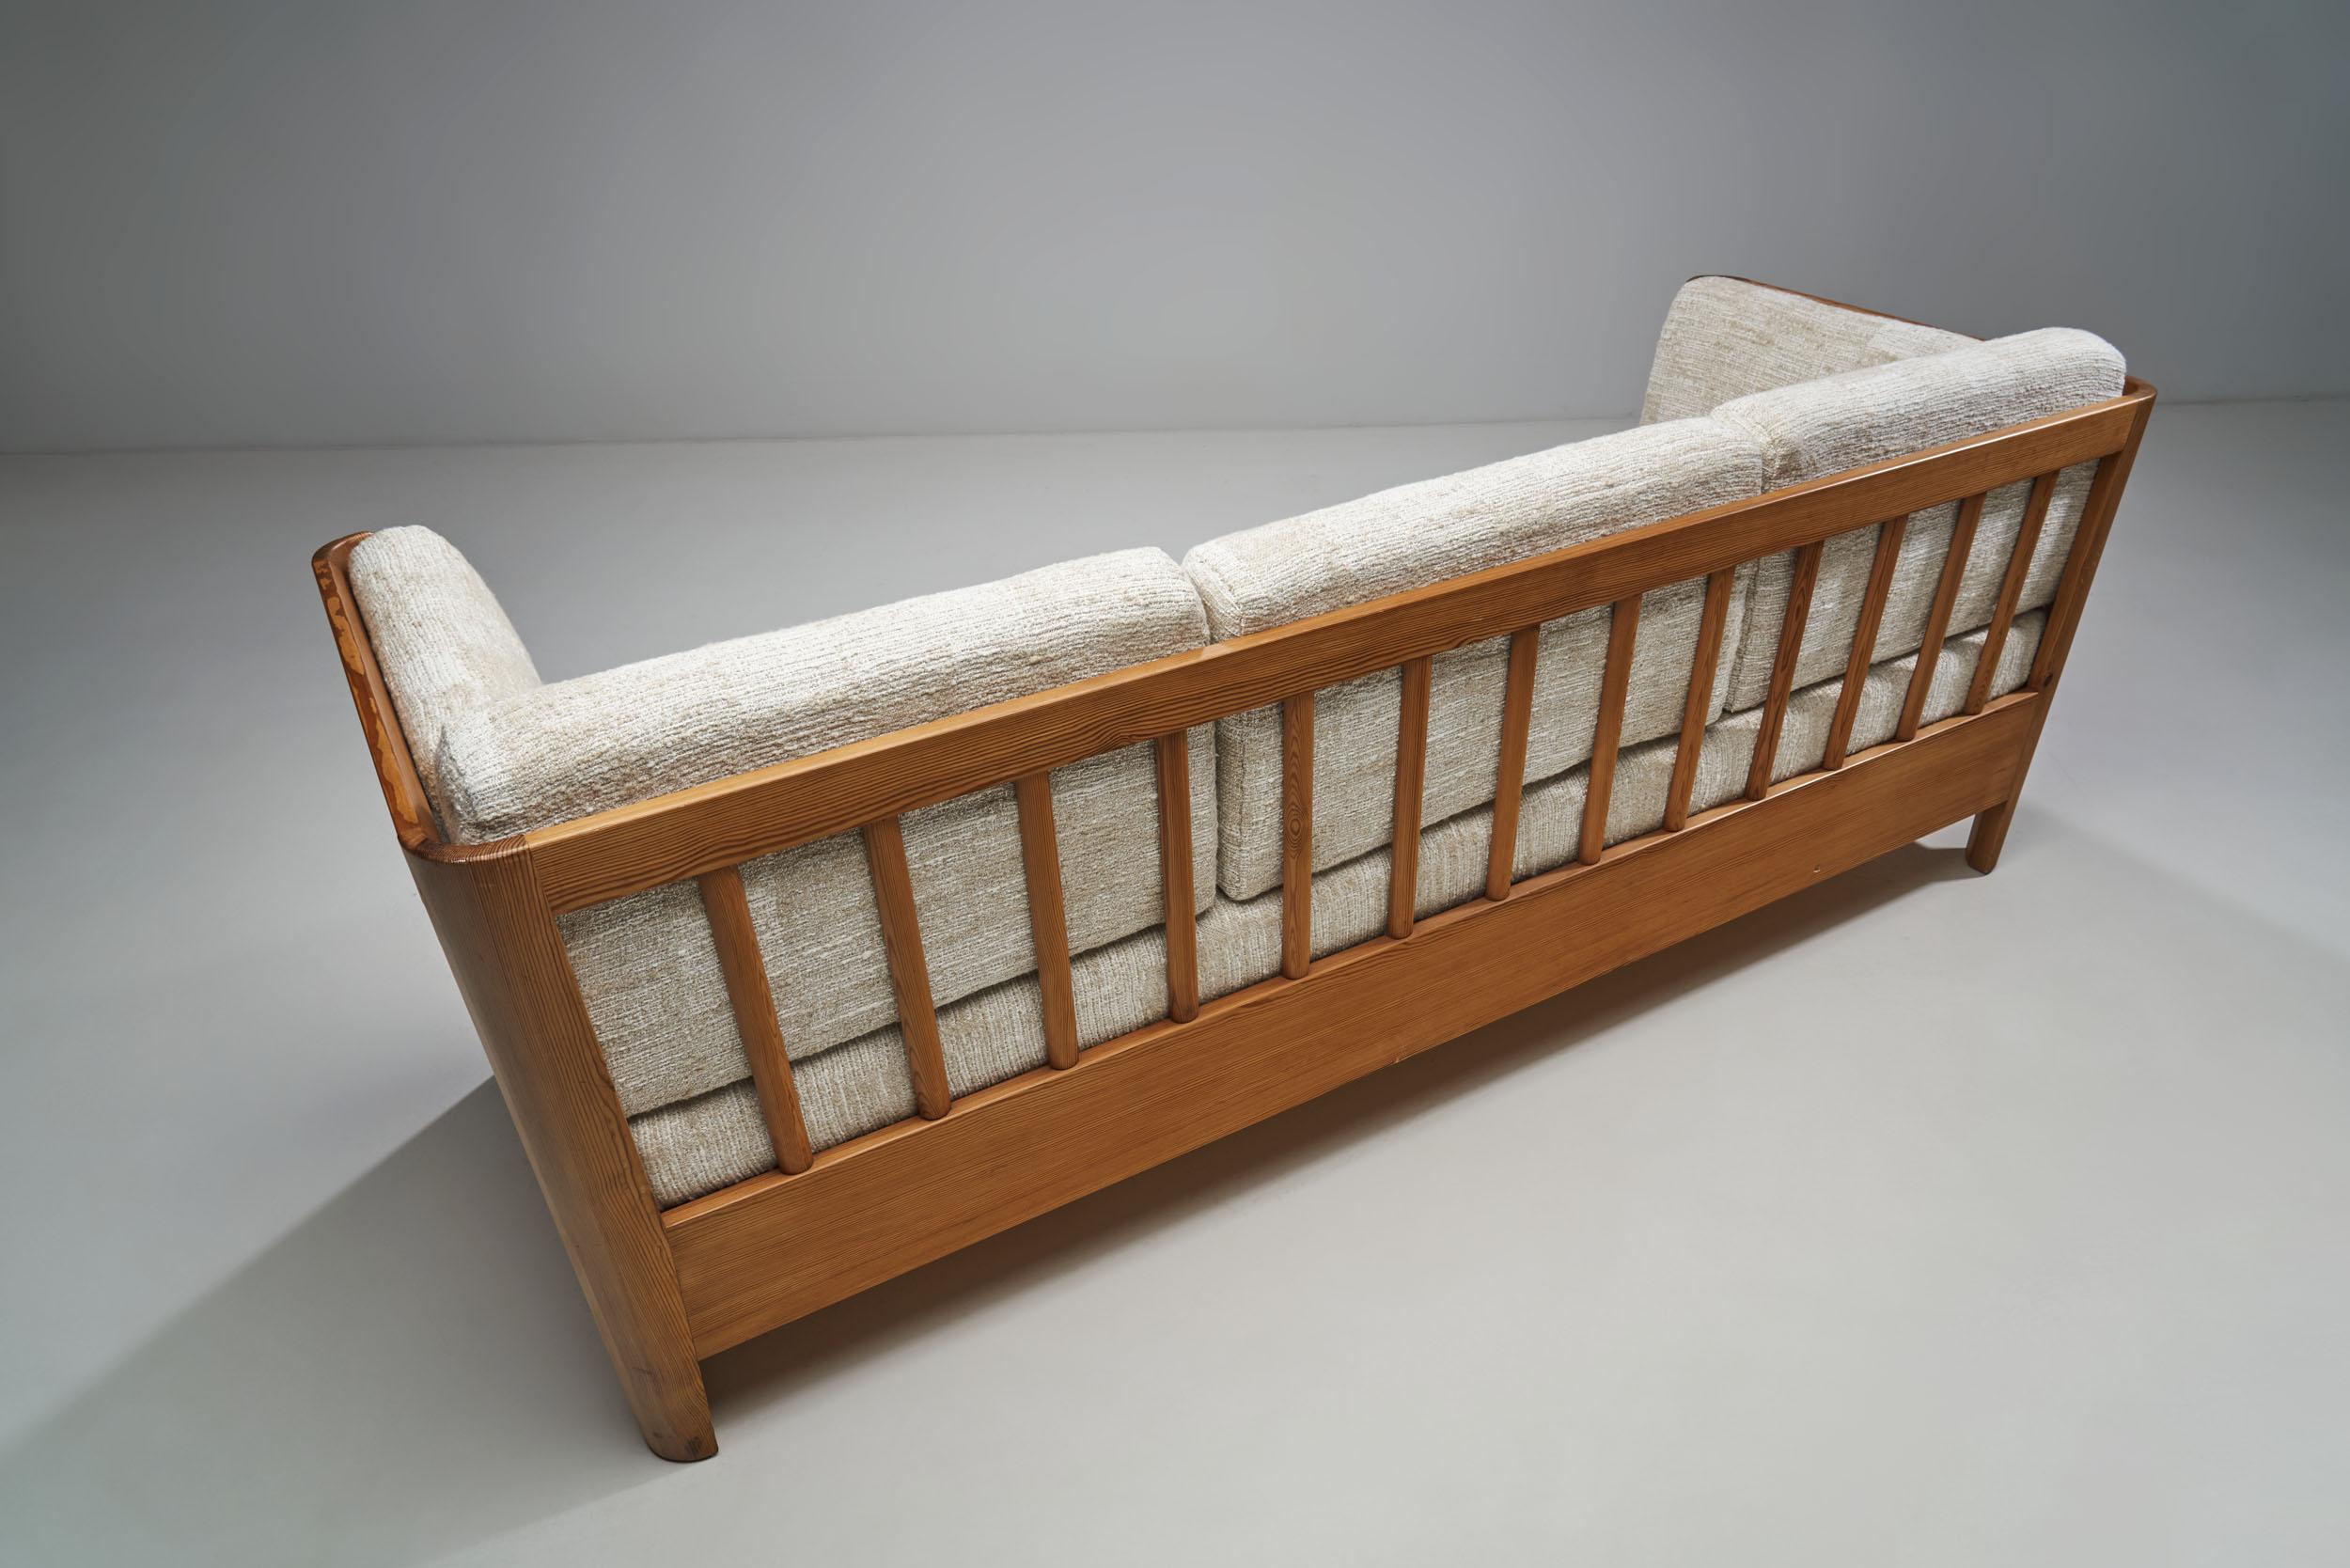 Fabric Carl Malmsten Early Pine Sofa Bed, Sweden, 1940s